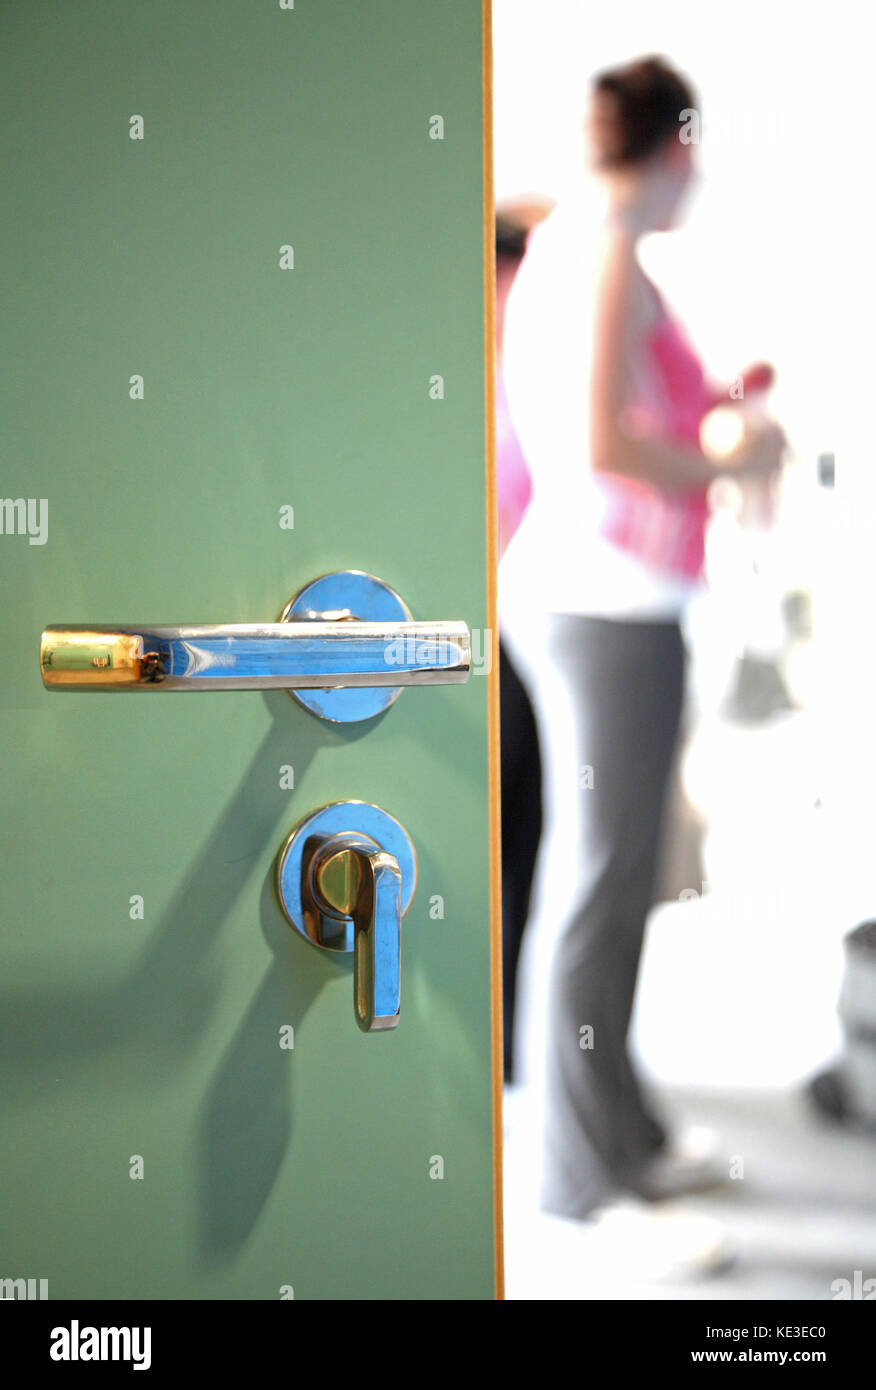 Close-up of changing room door in a UK sports centre. Shows handle and hand-operated lock, customers beyond (shown out of focus) Stock Photo